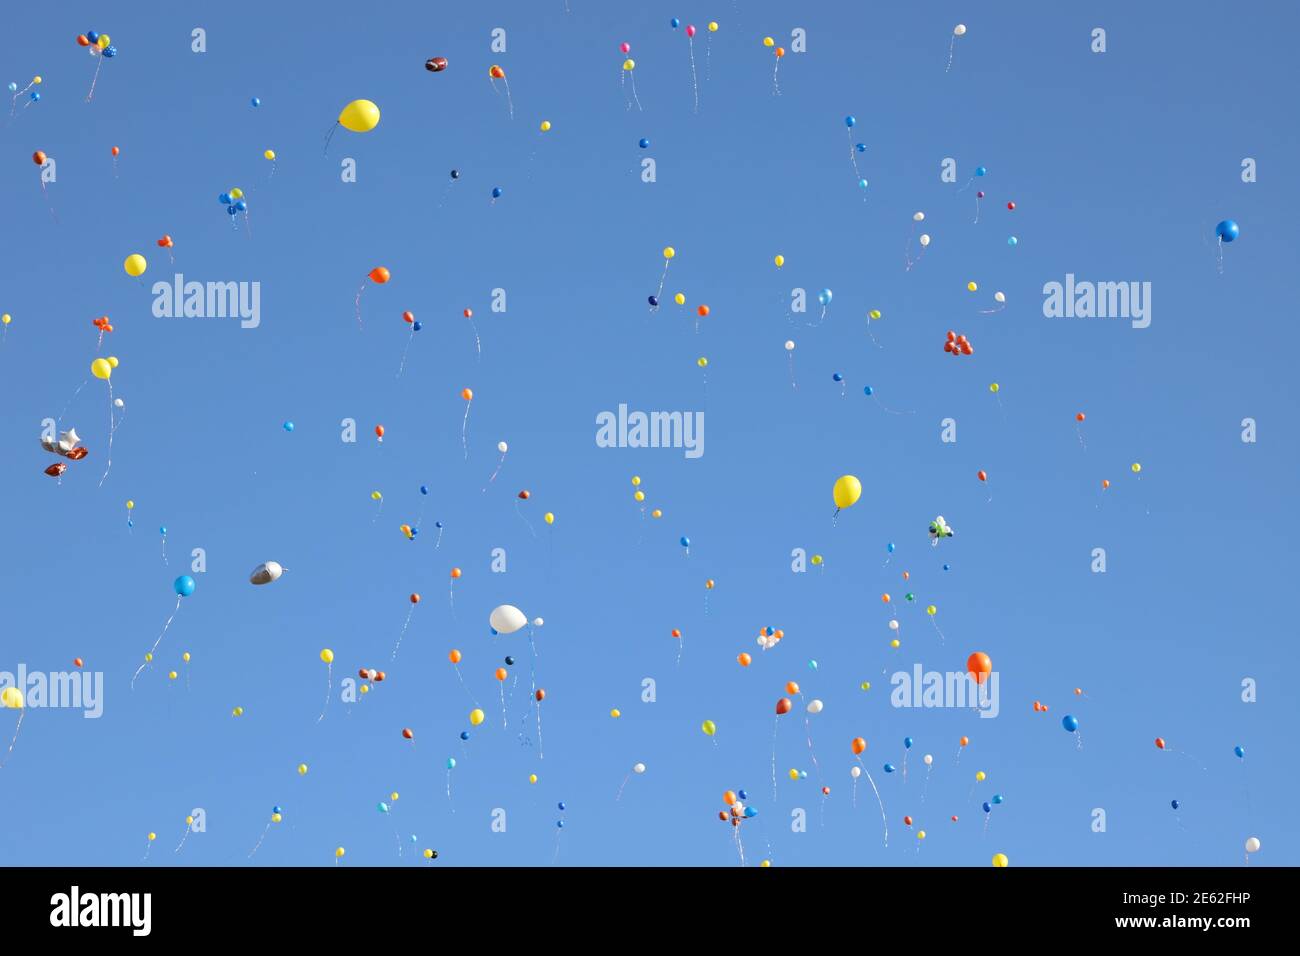 Balloons flying in the sky Stock Photo